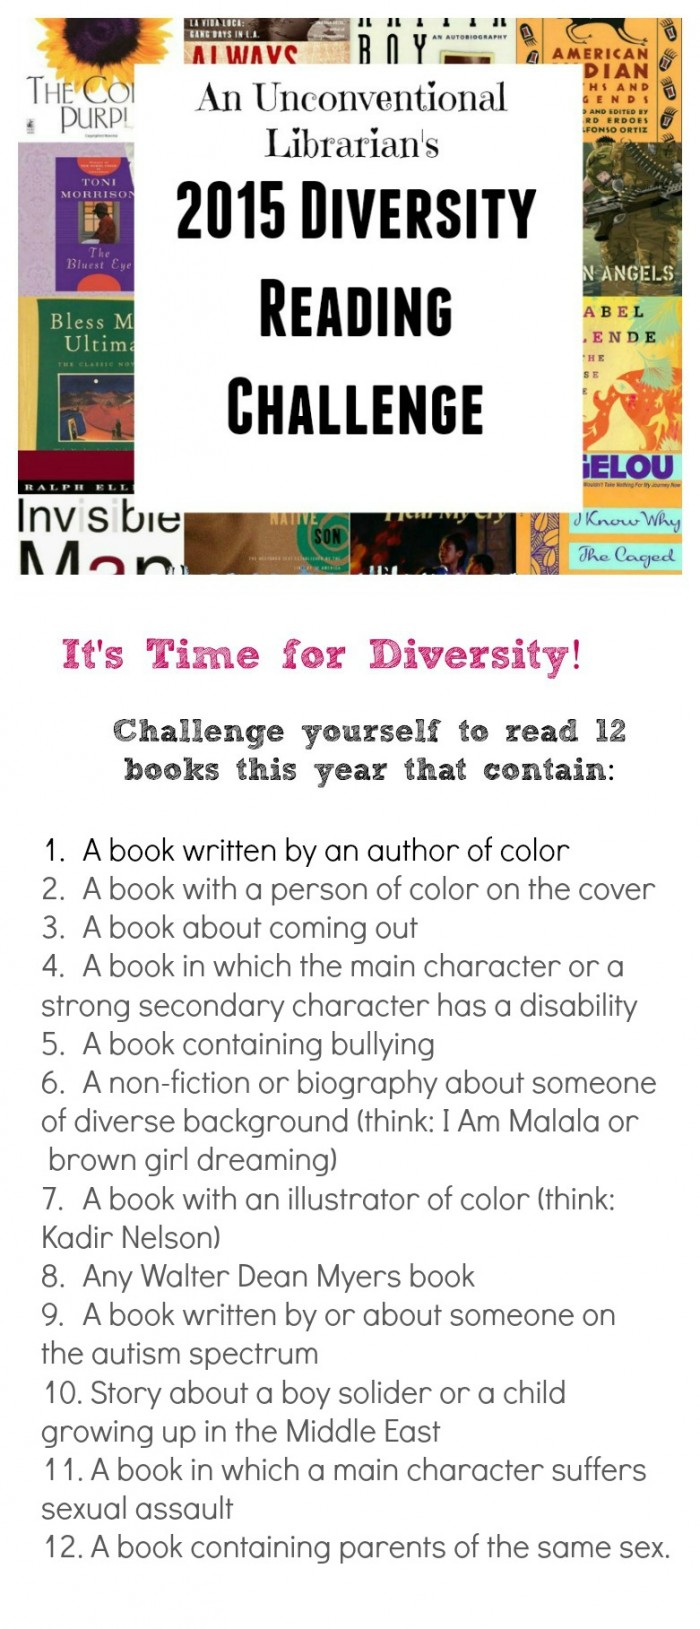 Diversity Reading Challenge Check up: How'd You Do?